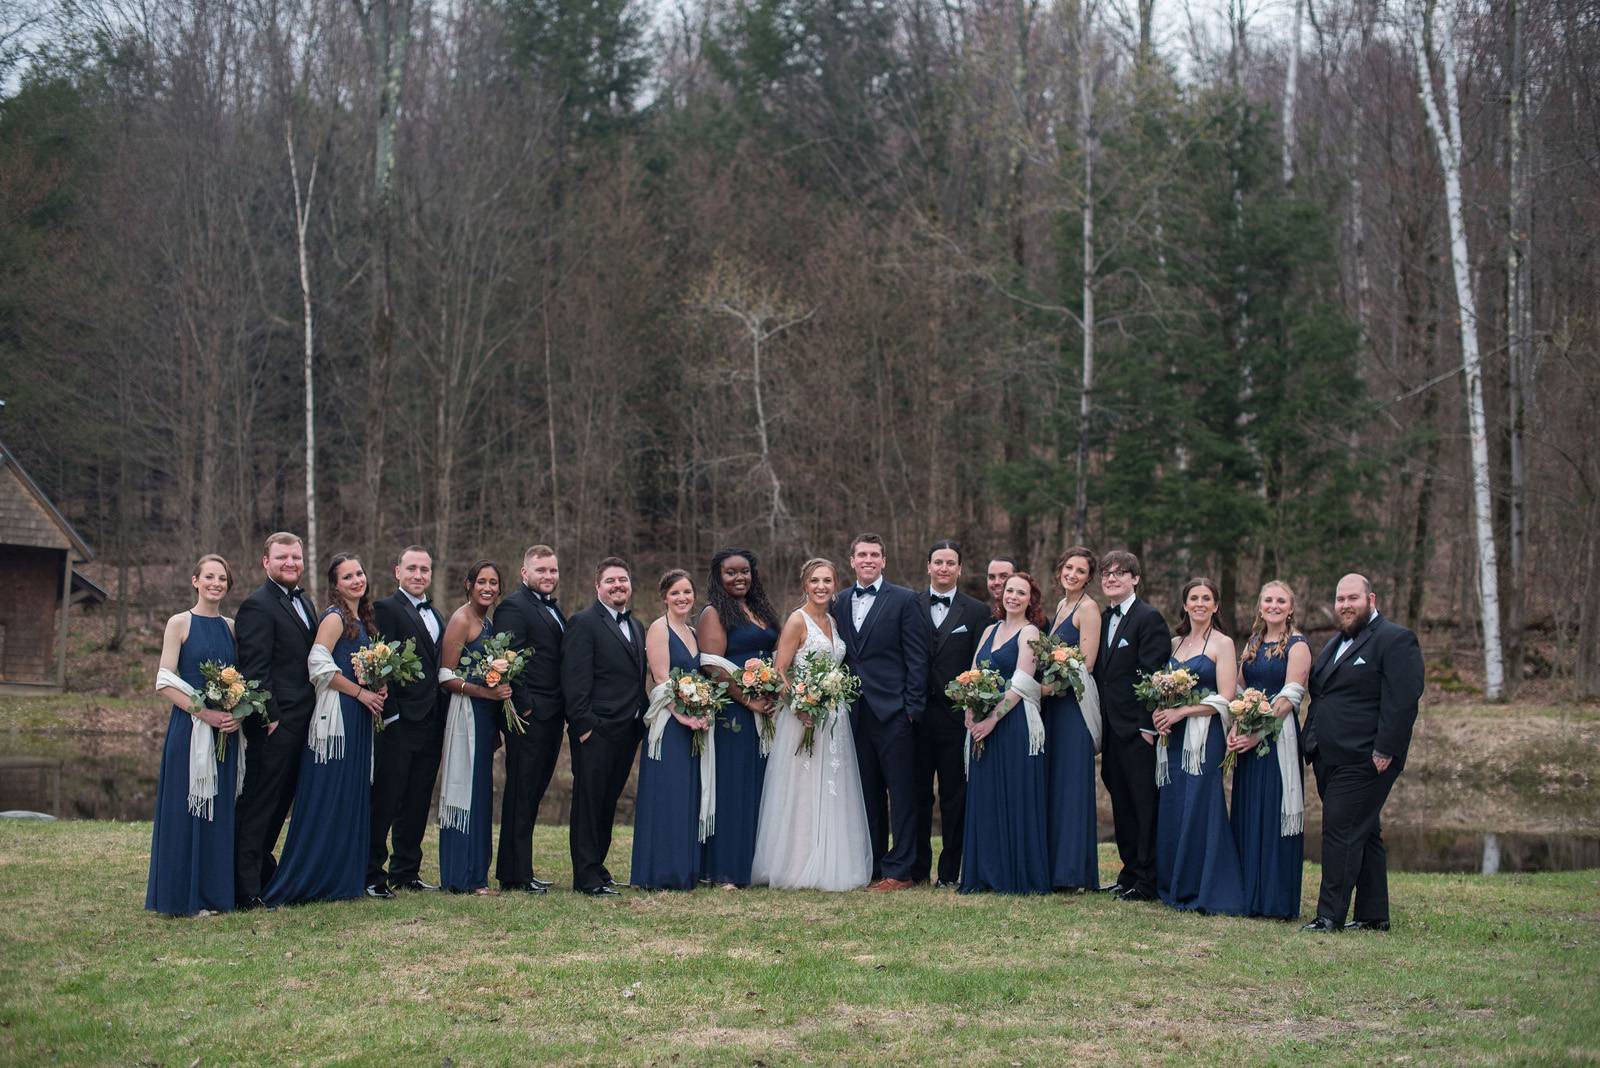 Wedding party with navy blue bridesmaid dresses on spring wedding day at Sleepy Hollow Inn in Vermon